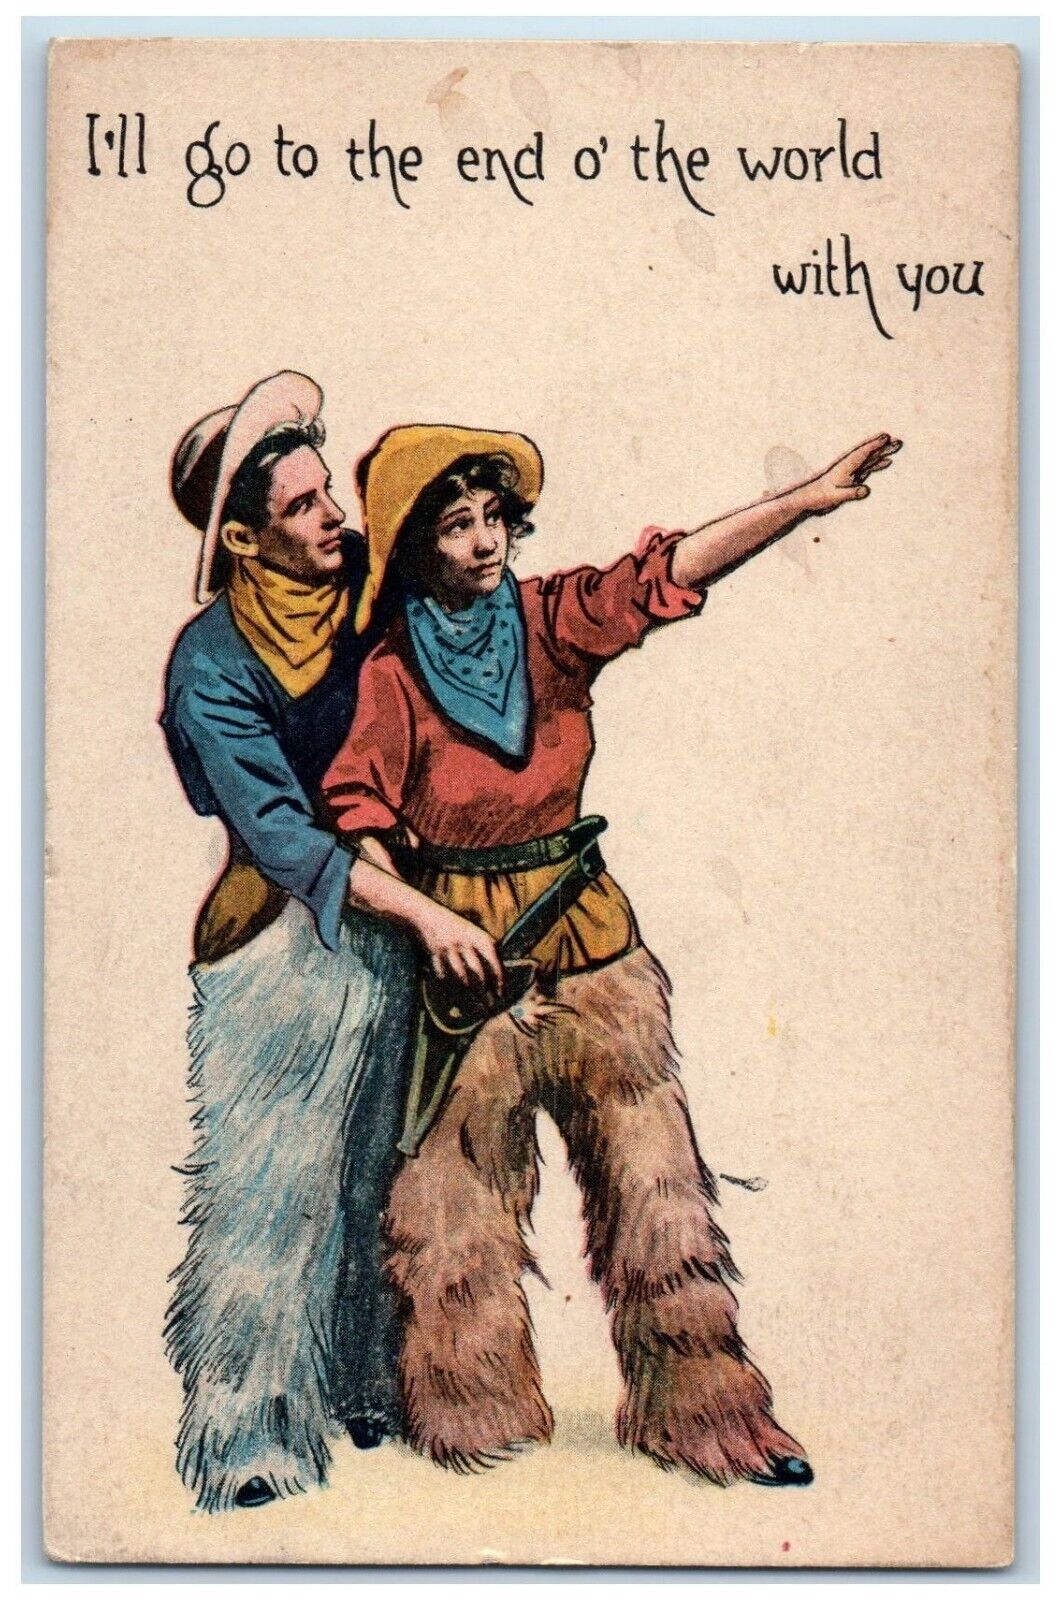 1913 Couple Cowboy Romance I'll Go To The End Of The World With You Postcard